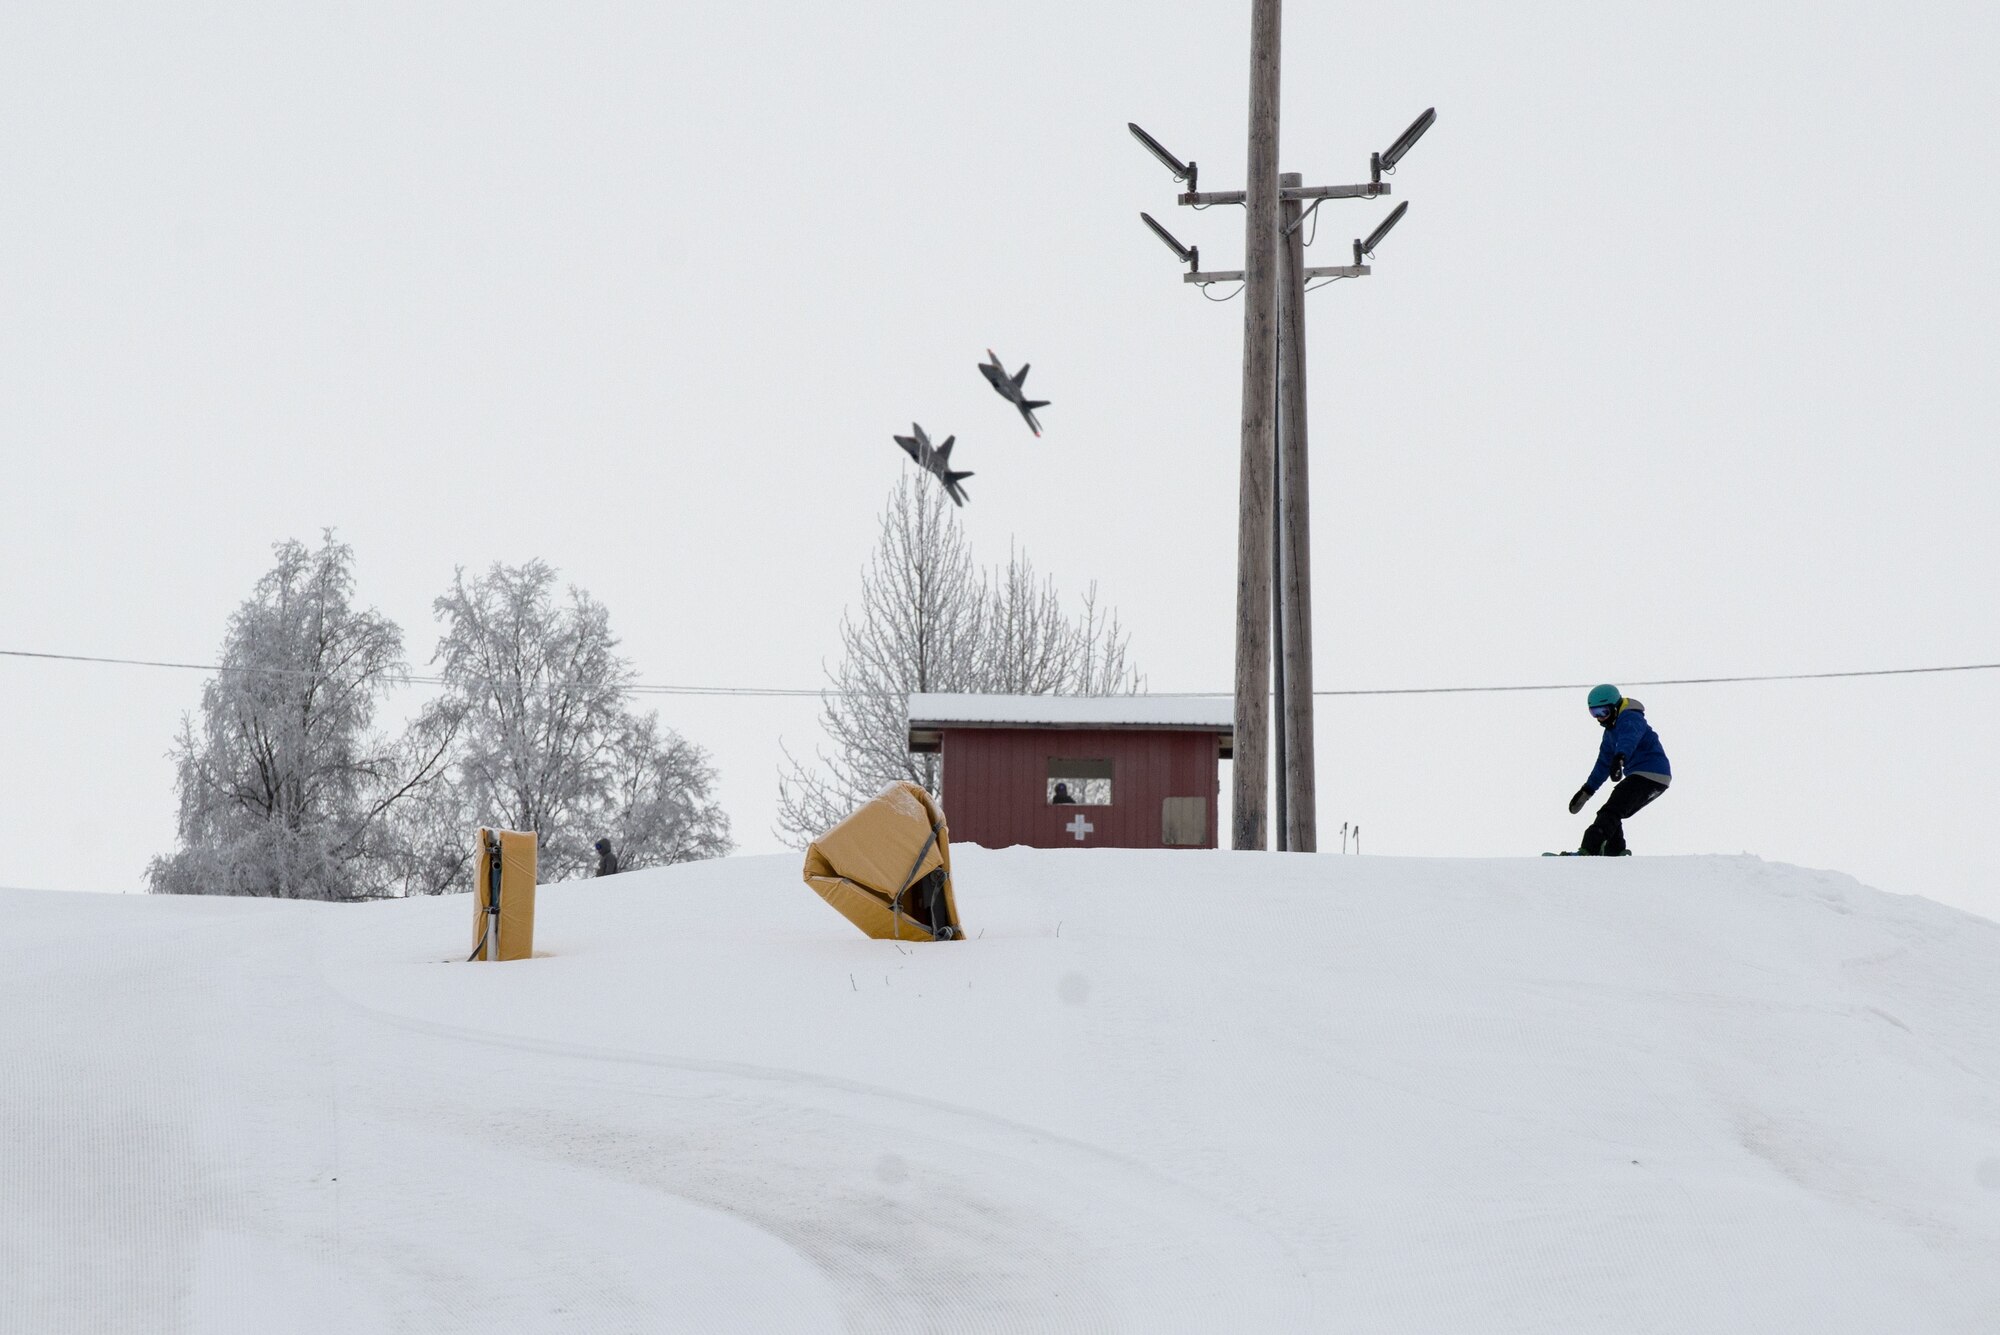 A snowboarder prepares to go down Hillberg Ski Area with F-22 Raptors in the background during Winterfest at Joint Base Elmendorf-Richardson, Alaska, Dec. 21, 2017. Winterfest was a winter solstice celebration hosted by Hillberg for anyone with base access and offered a plethora of events from noon to as late at 8 p.m.